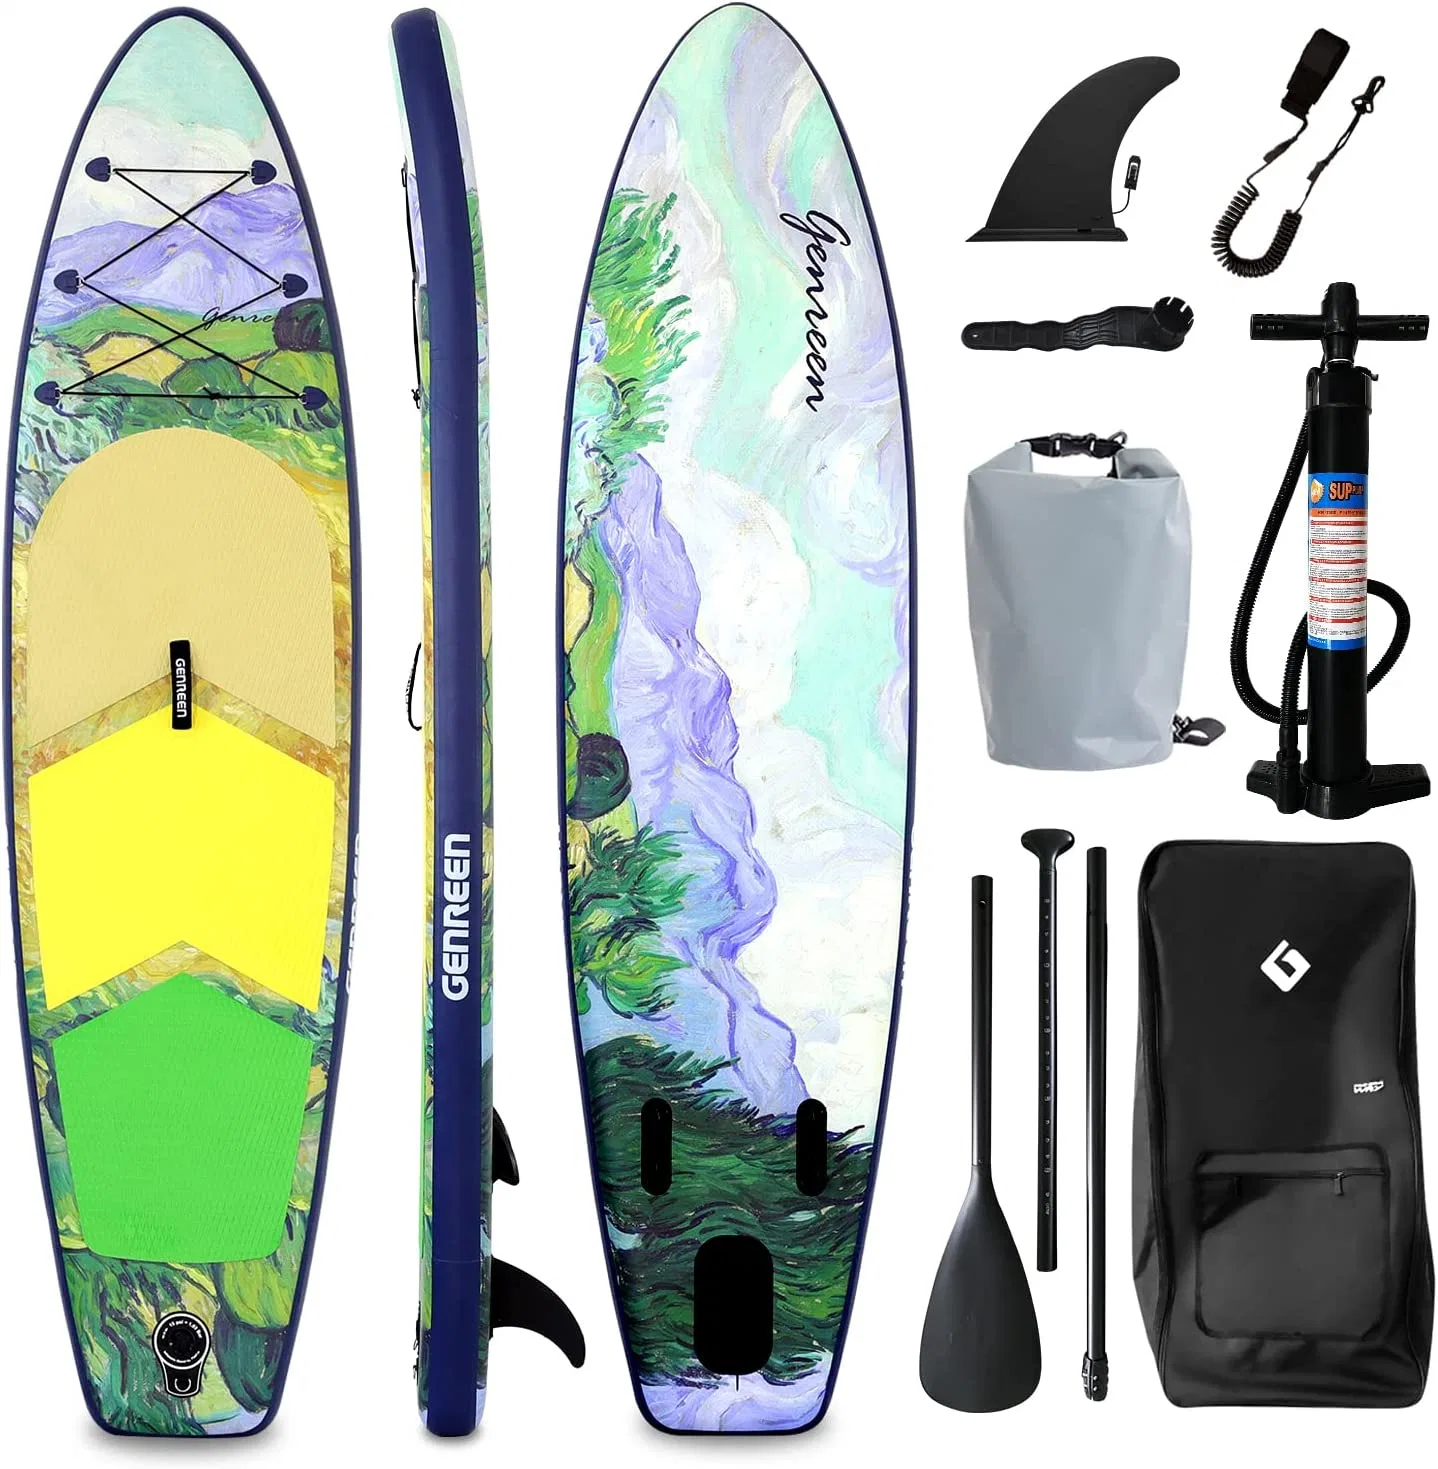 Inflatable Stand up Paddle Board Non-Slip Deck with Premium Sup Accessories Perfect for Youth Adults Beginner